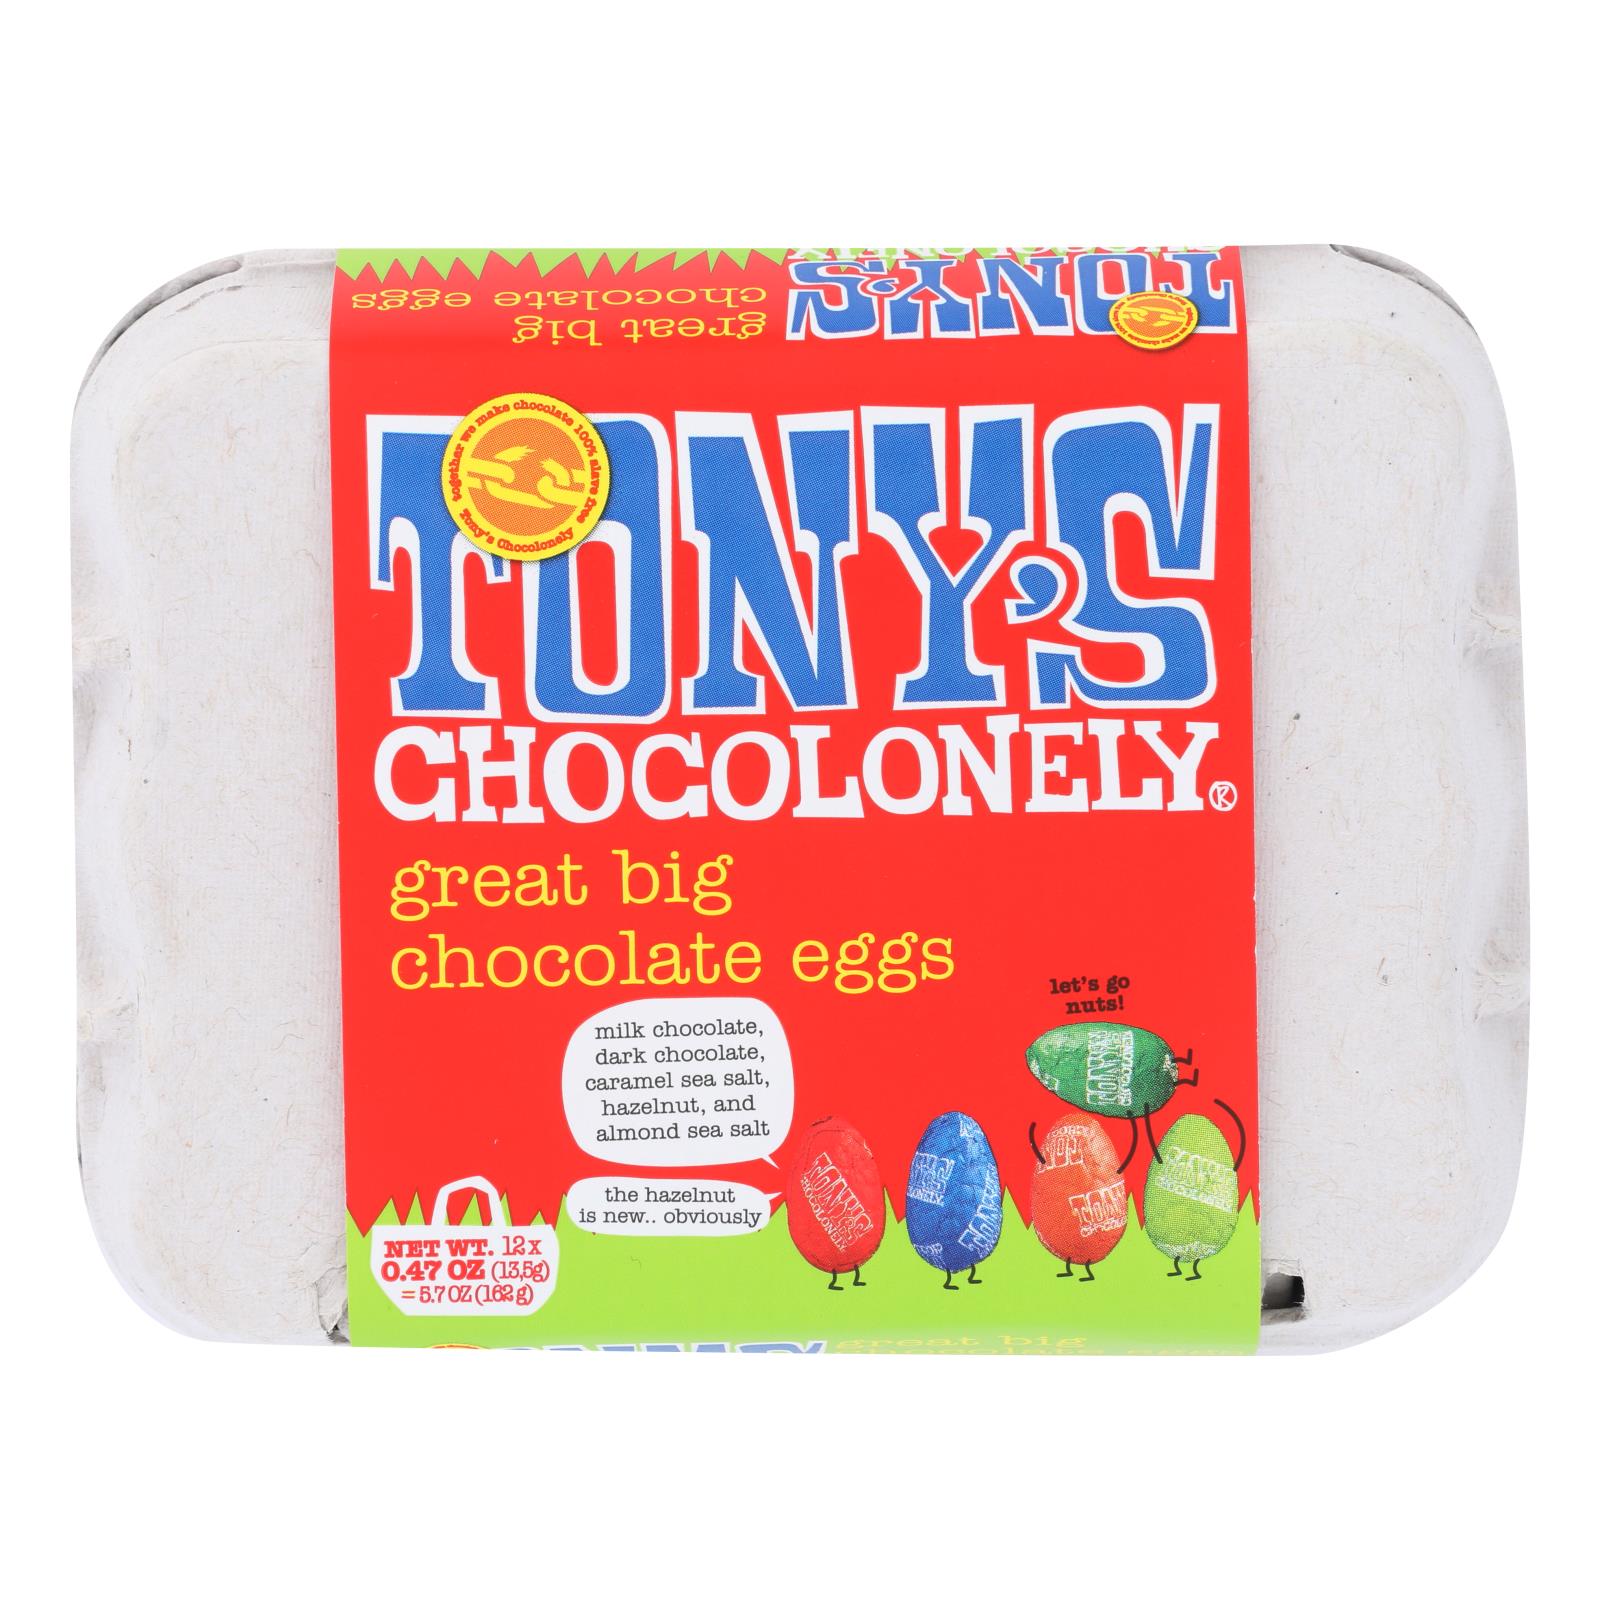 Tony's Chocolonely - Eggs Chocolate Great Big - Case Of 24 - 5.7 Oz